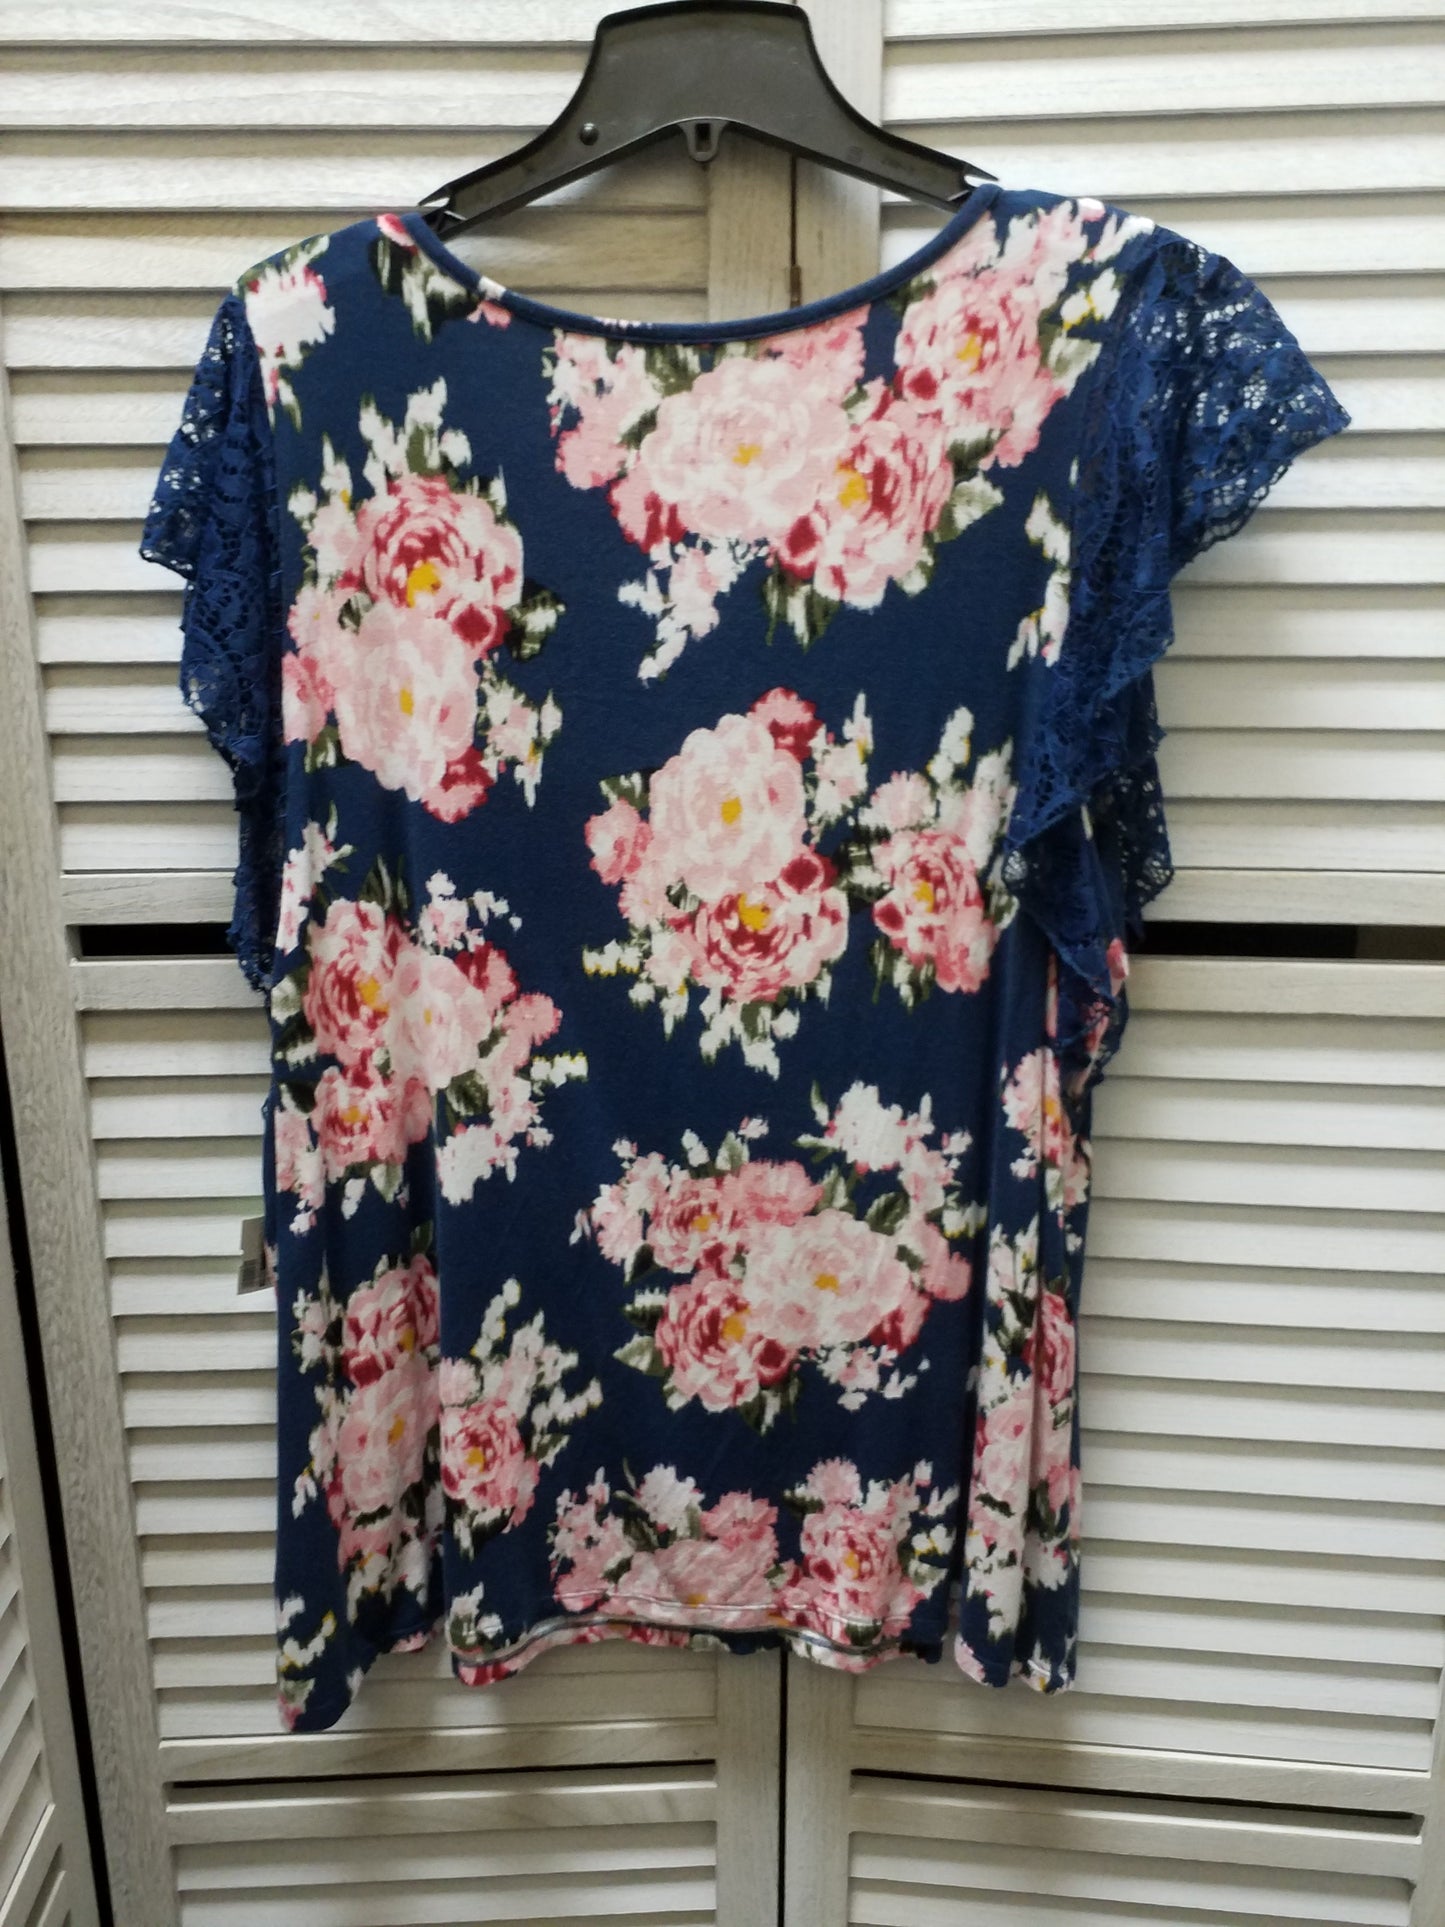 Top Short Sleeve Basic By Torrid  Size: 2x